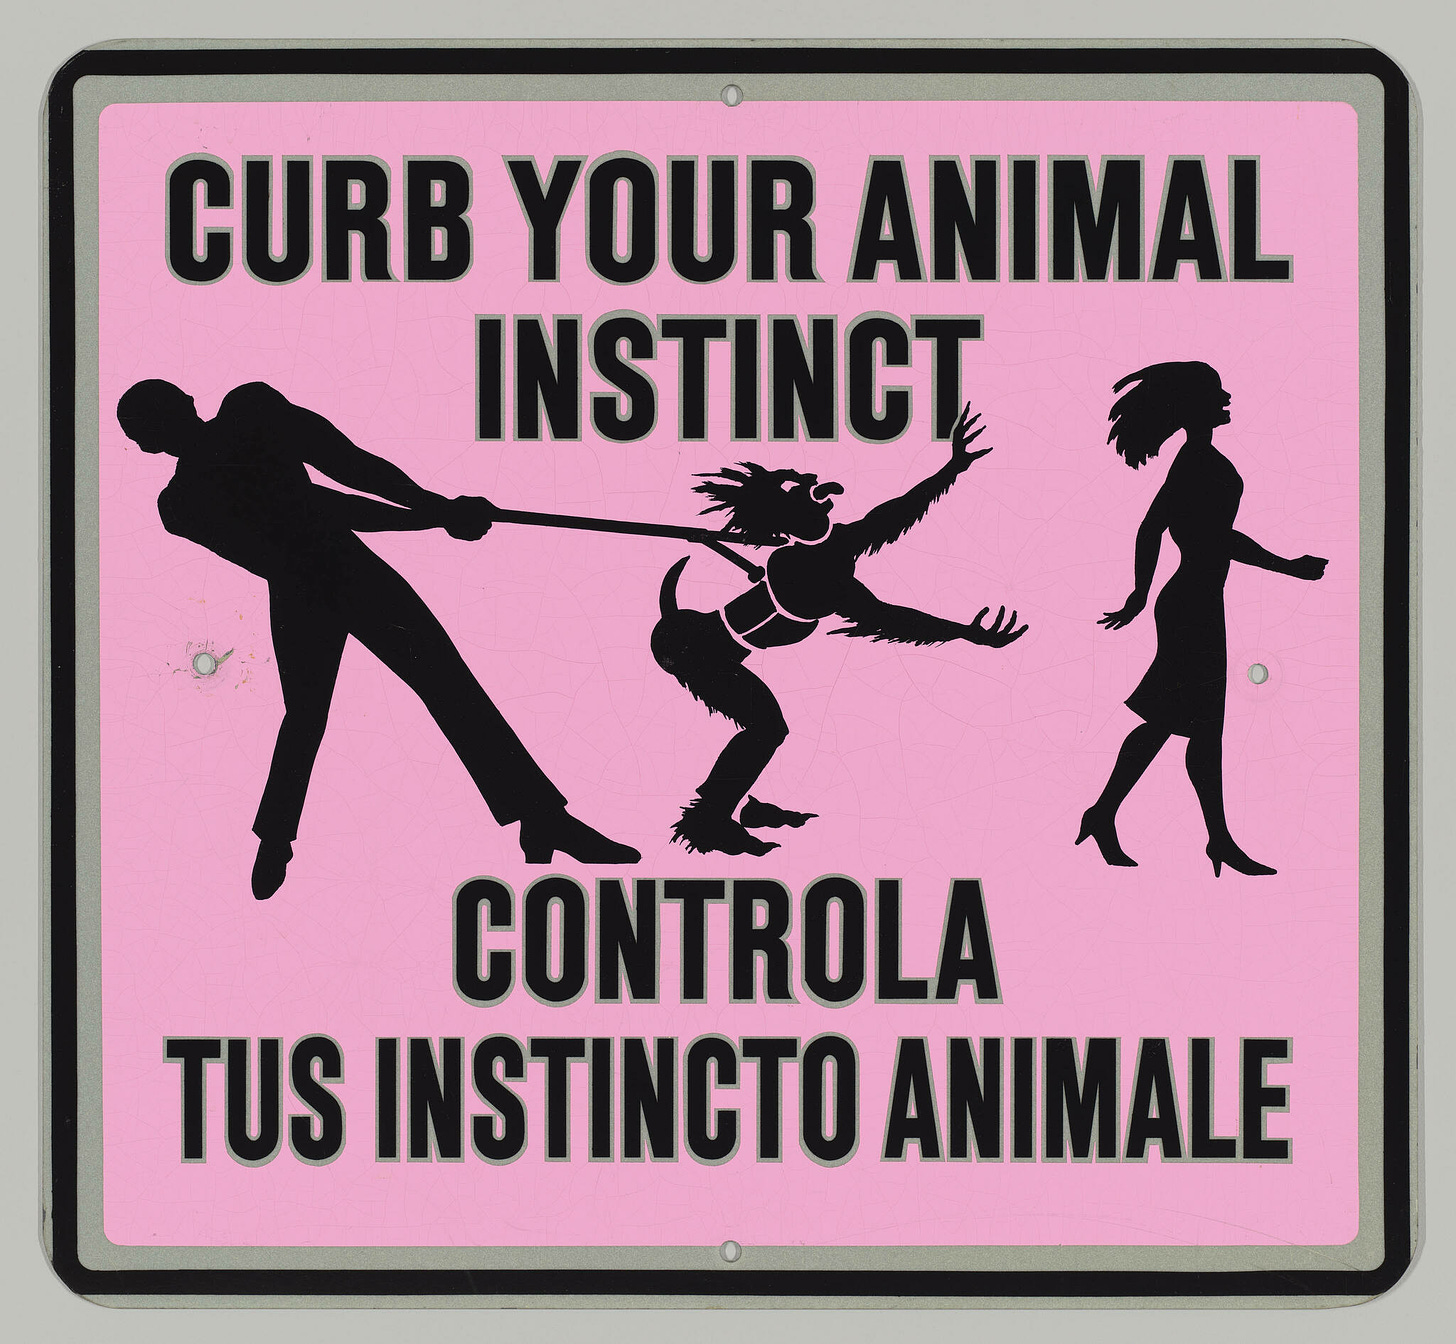 Street sign showing a man restraining a demon beast grabbing at a woman, with a message in English and Spanish saying "Curb your animal instinct."